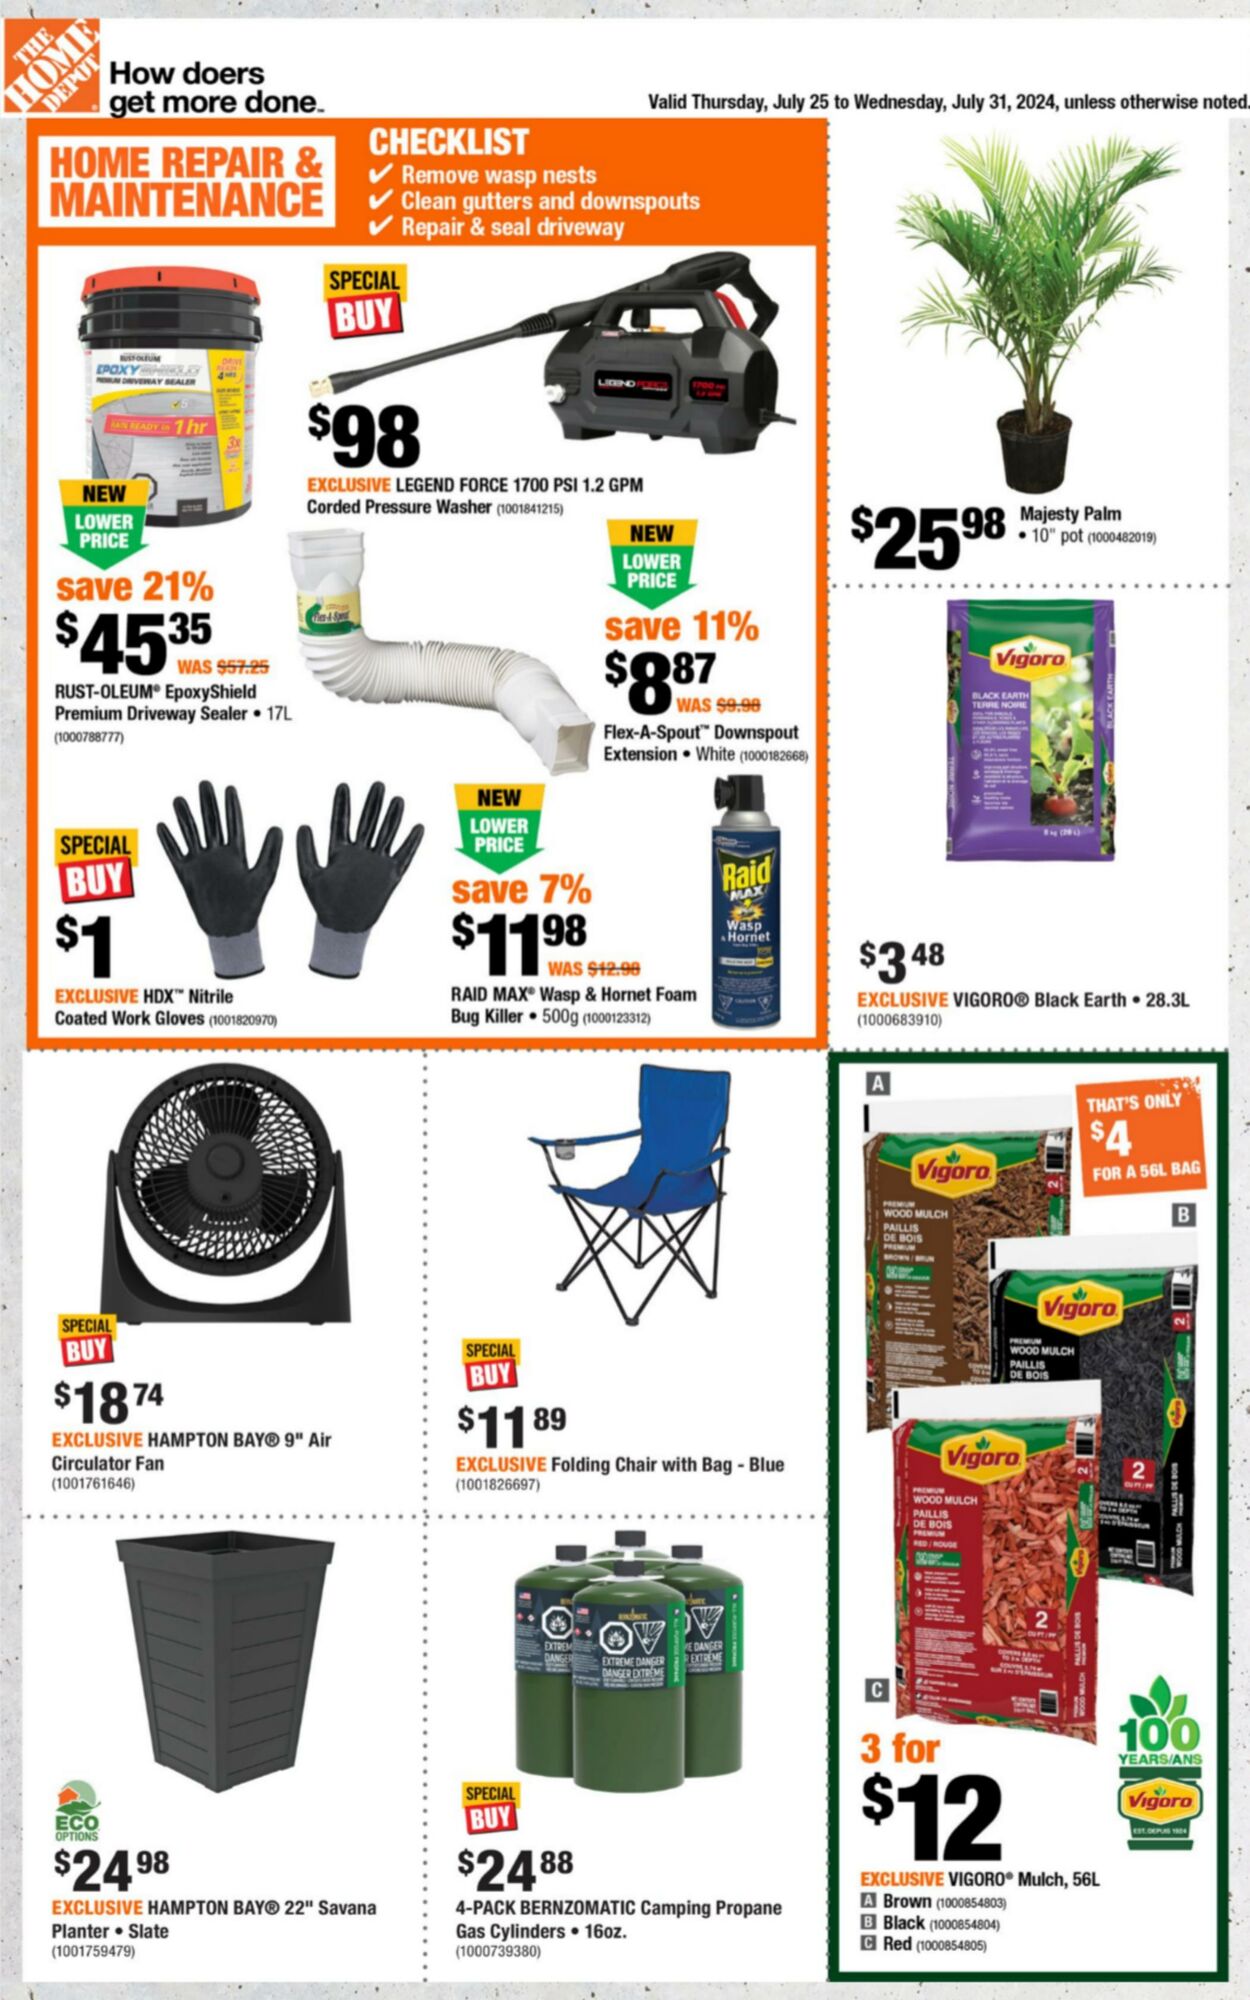 Home Depot Promotional flyers